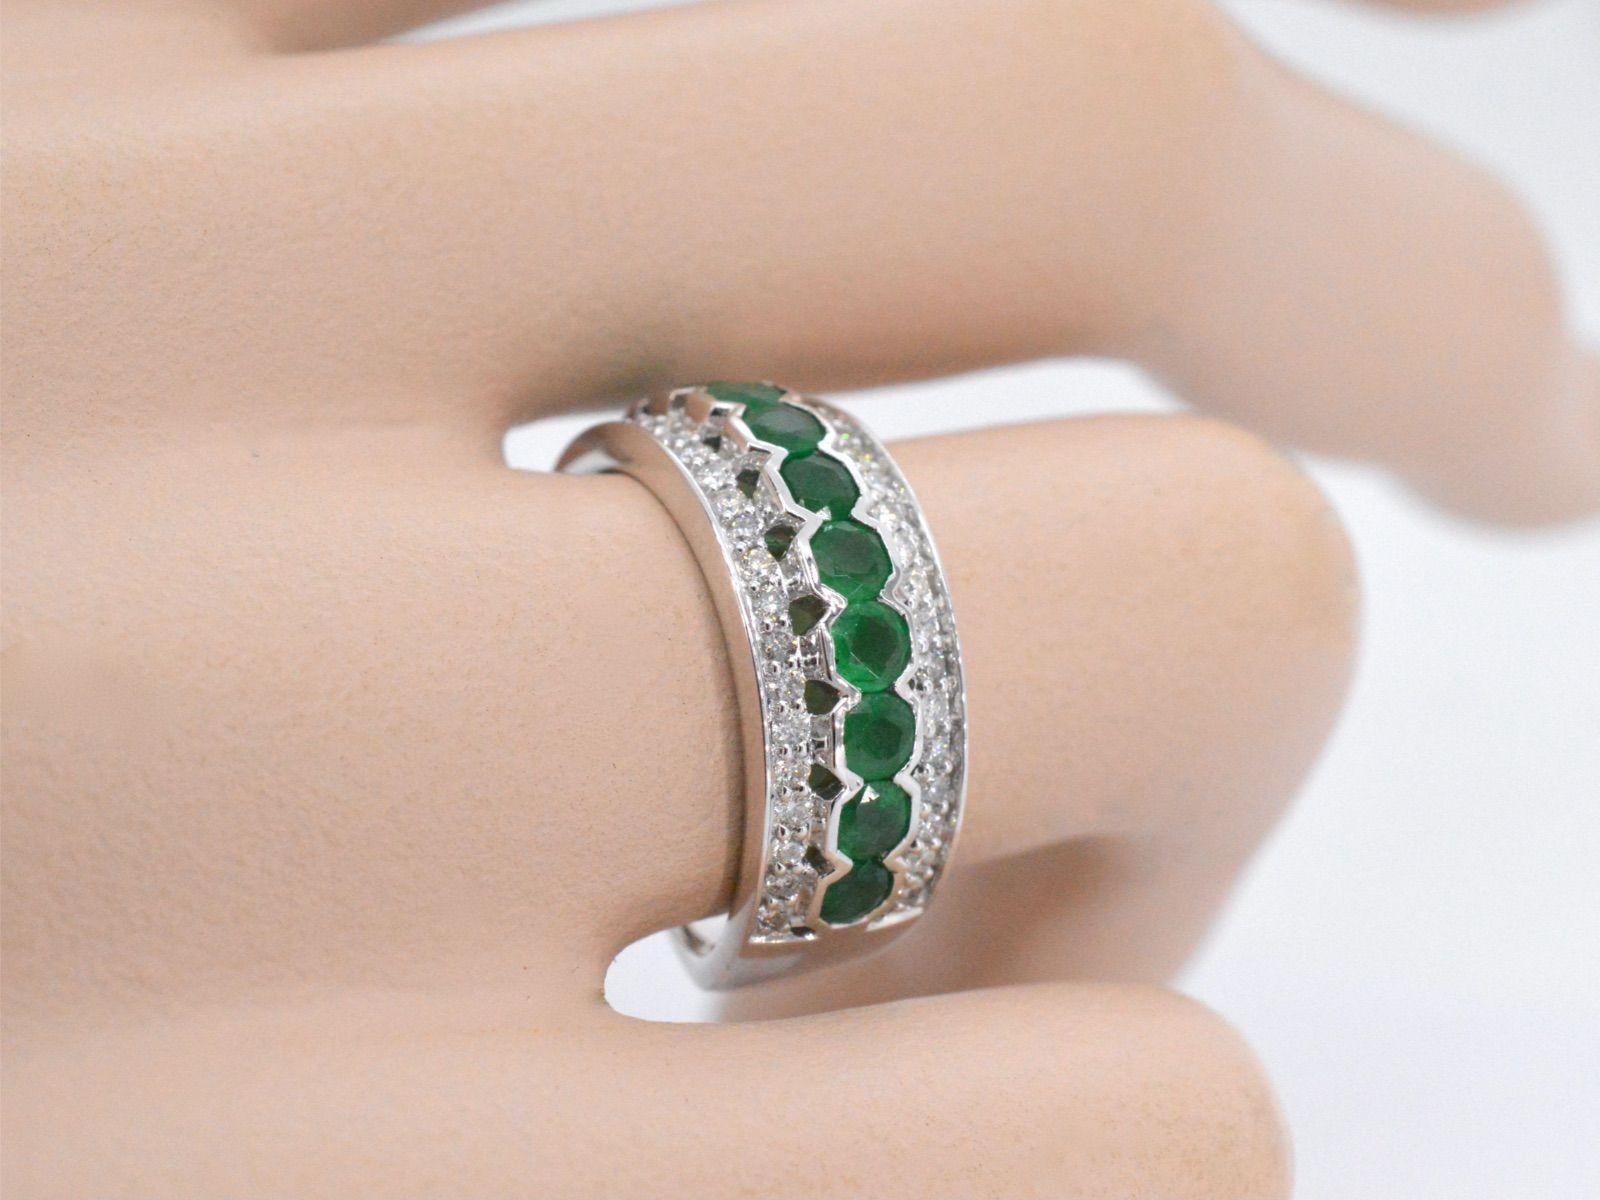 A white gold ring with diamonds and emeralds is a beautiful piece of jewelry that combines the elegance of diamonds with the rich green hue of emeralds. The sparkling diamonds and vibrant emeralds are expertly set in a band of lustrous white gold,